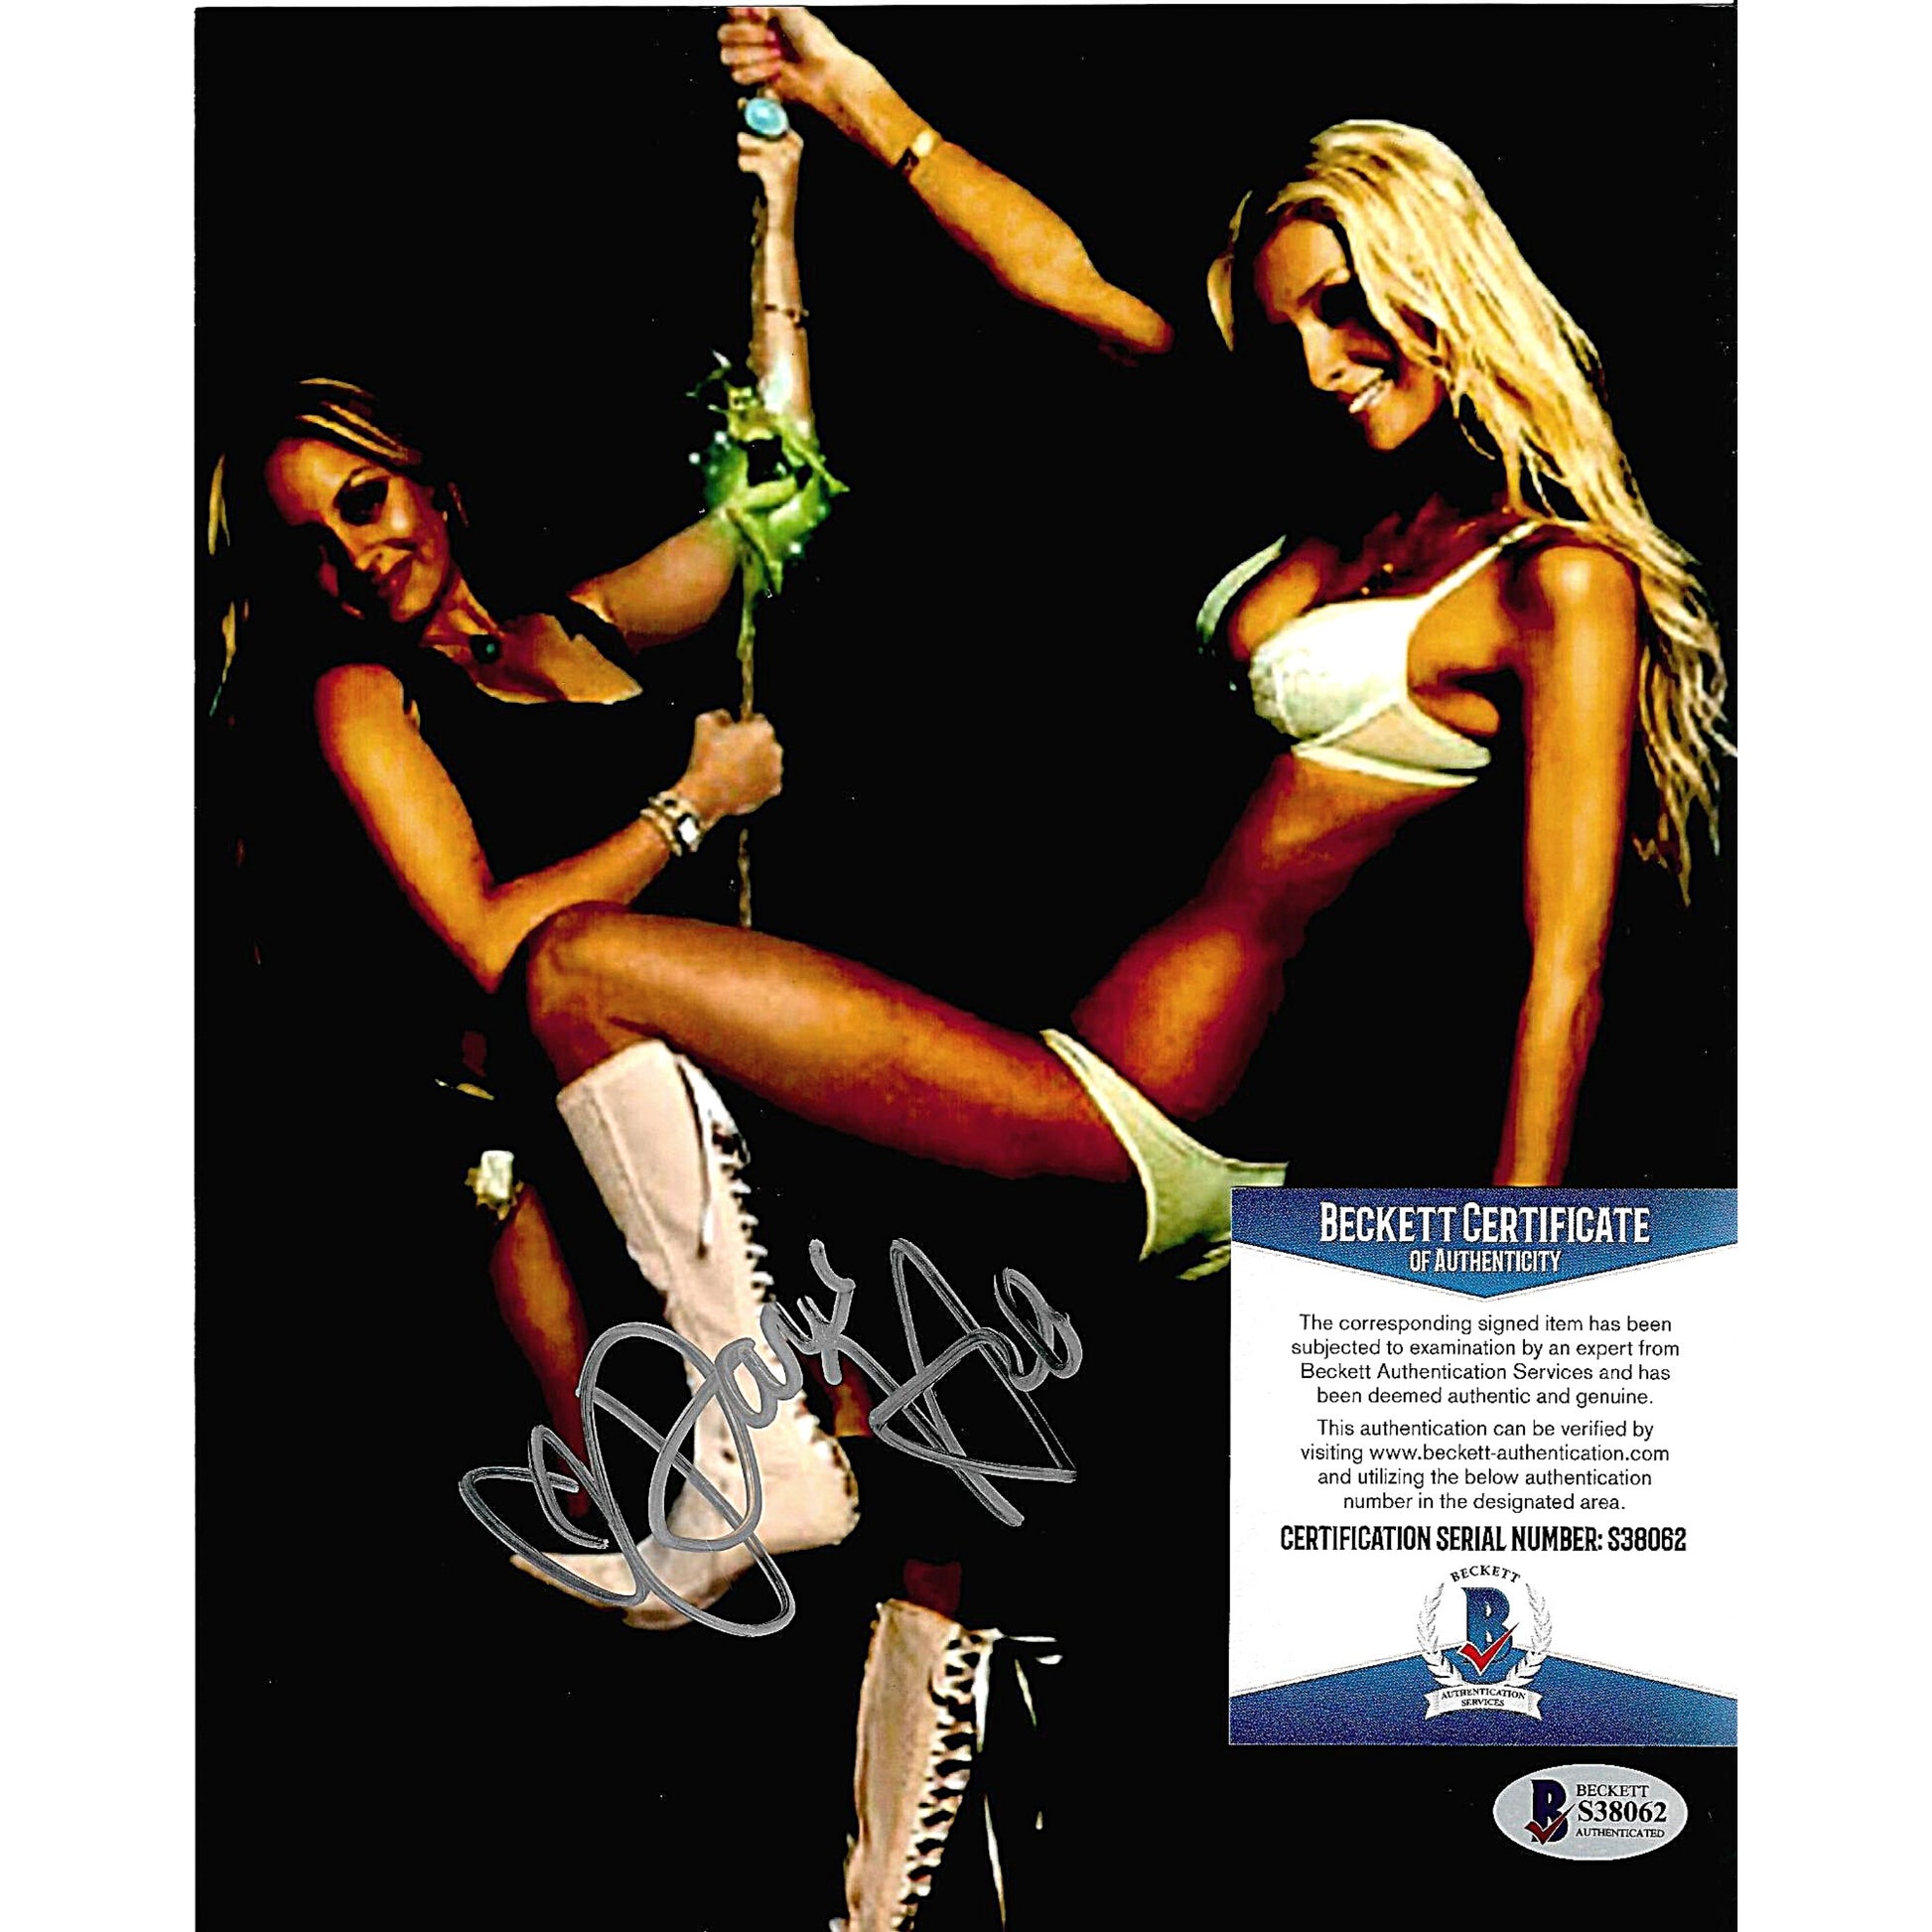 Hollywood- Autographed- Paris Hilton Signed Dancing on the Pole 8x10 Photo Beckett Authentication Services BAS S38062